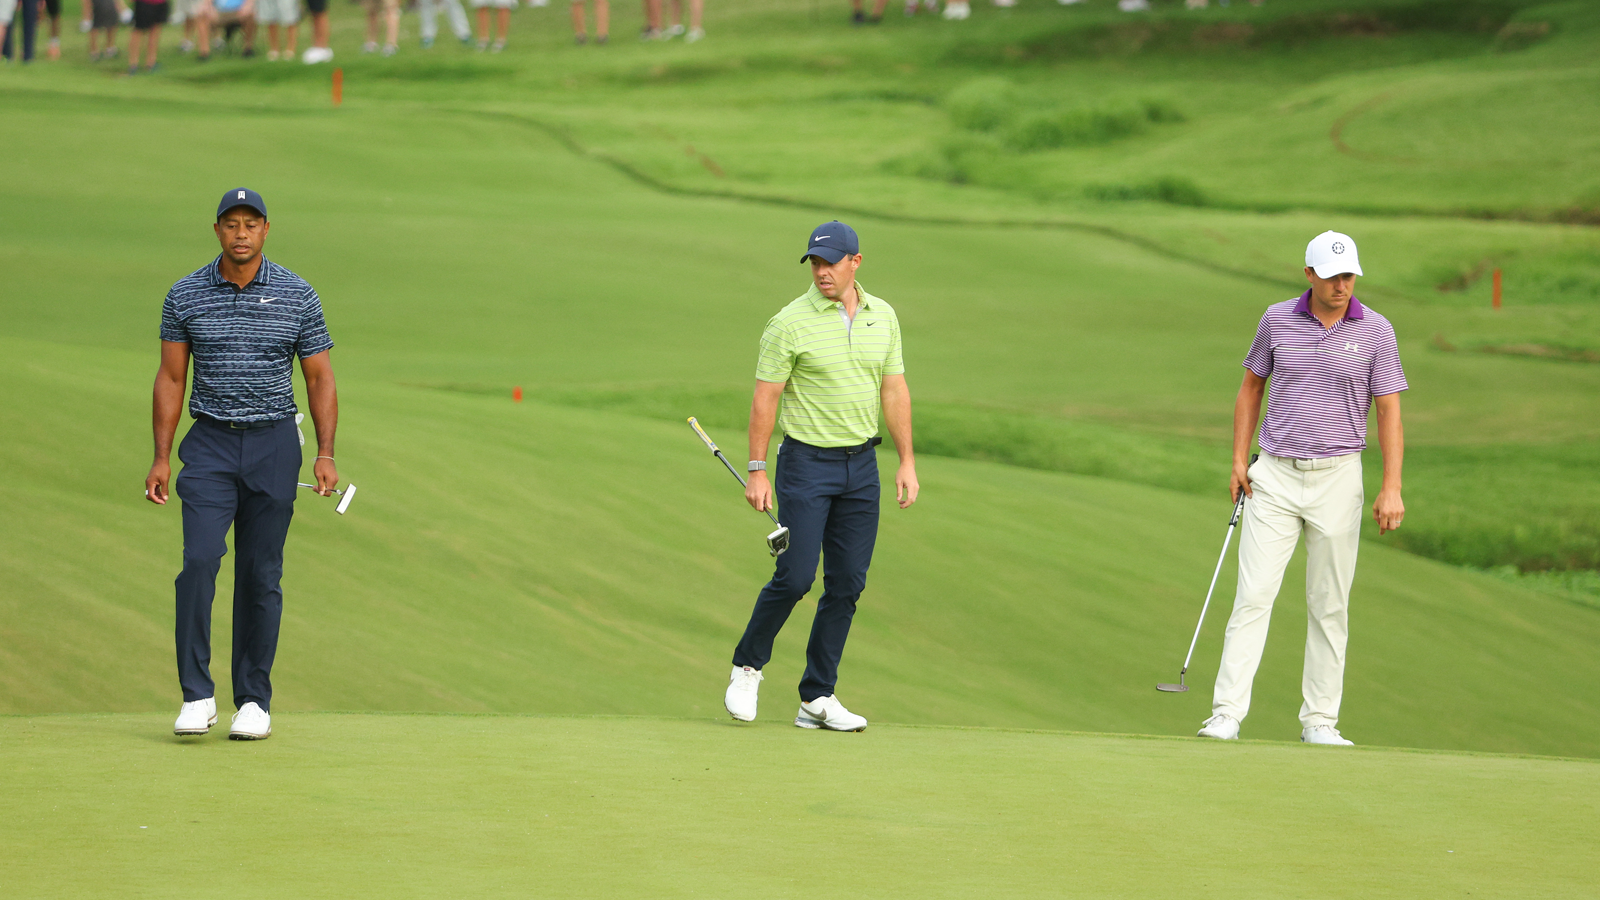 Tiger Woods, Rory McIlroy and Jordan Spieth study the 10th green during the first round of the 2022 PGA Championship.(Photo by Andrew Redington/Getty Images)